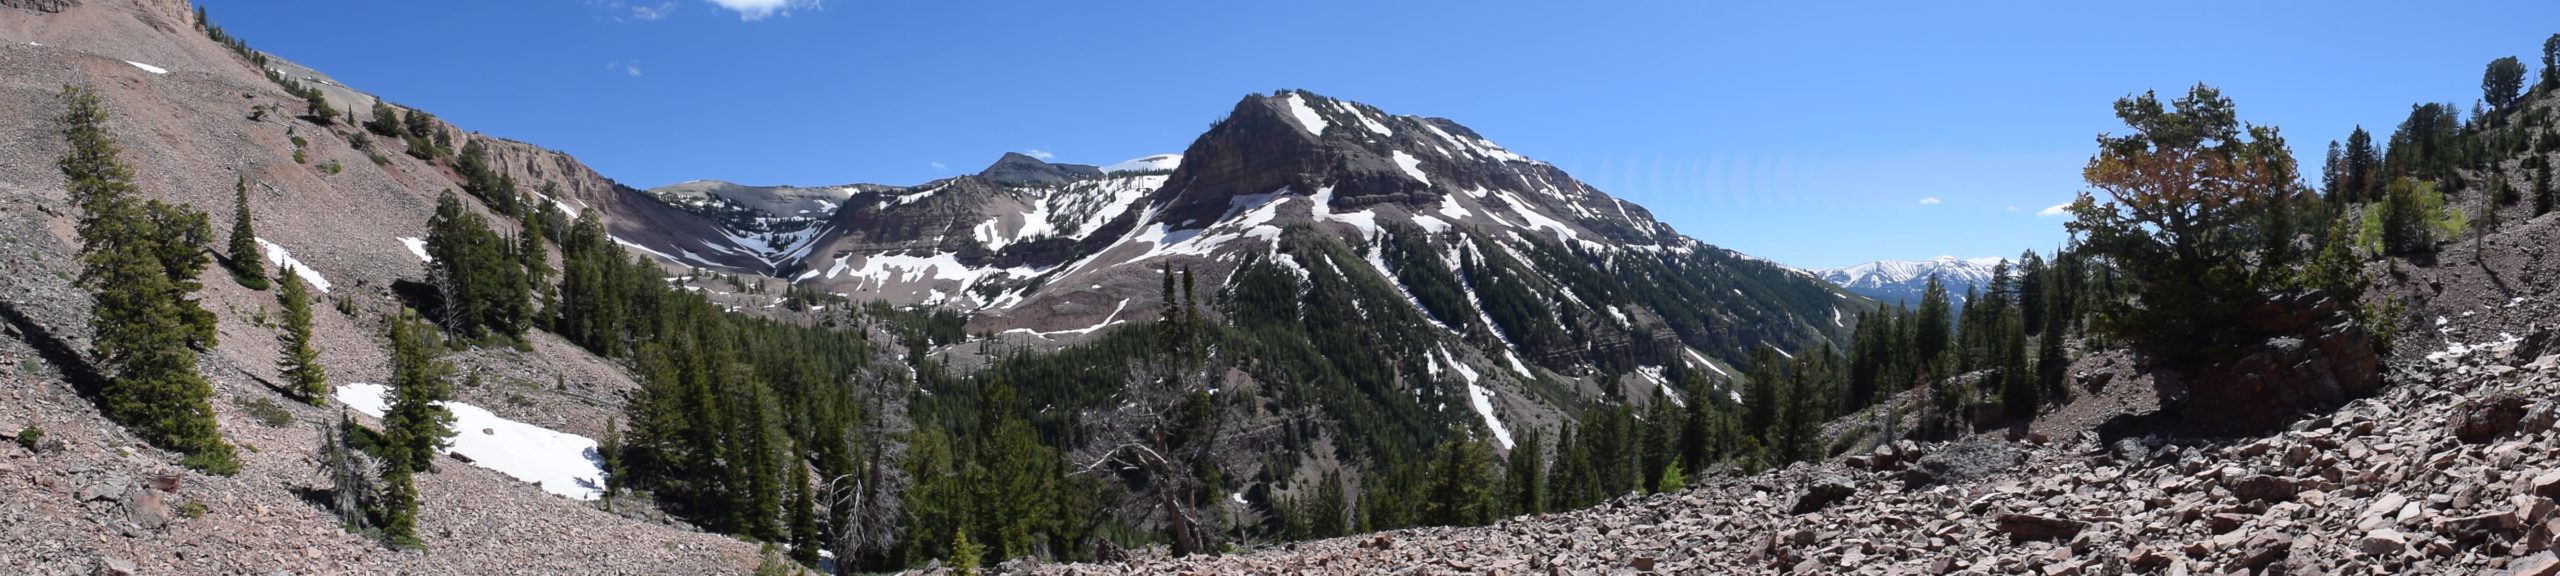 Box Canyon is shown, with rocky slopes, evergreen trees, and a mountain peak.